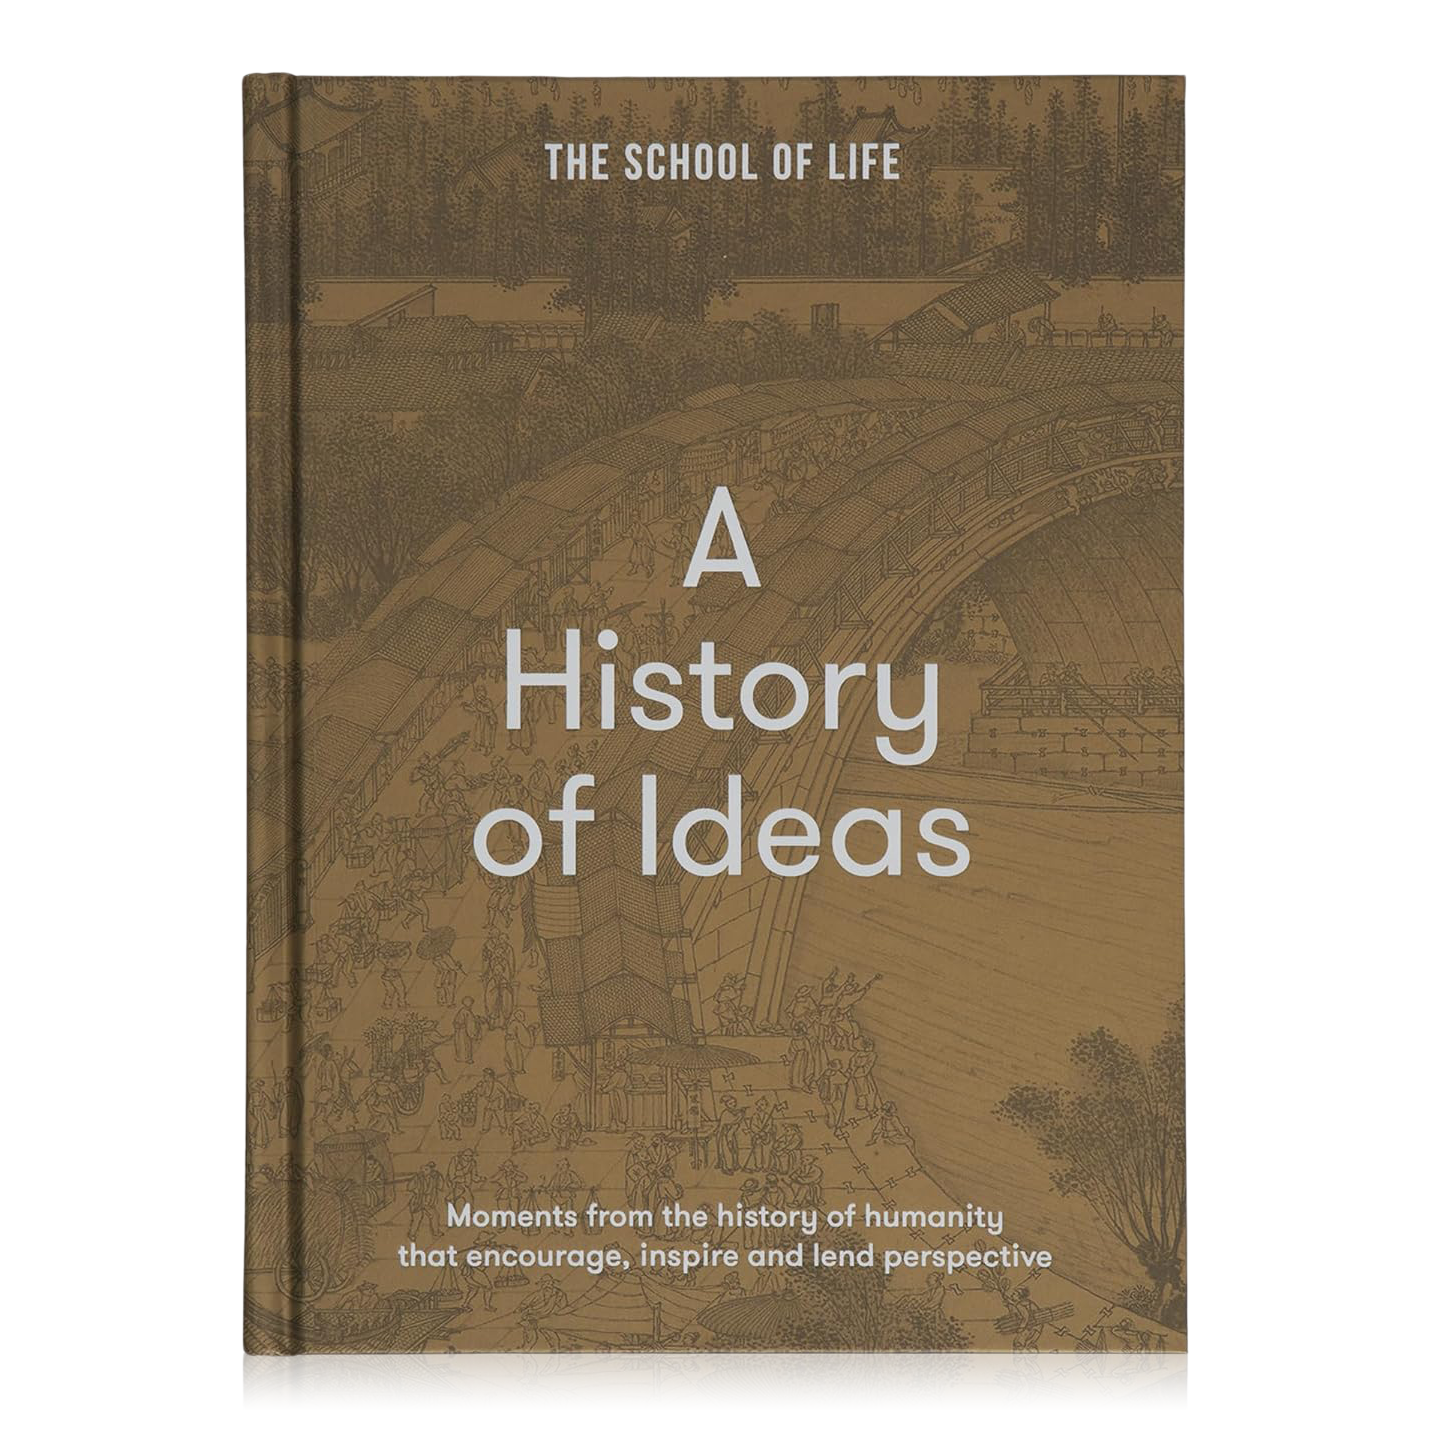 r0529-13.Dictionary of the History of Ideas 1~4、index/思想史辞典/法律/心理学/アイデア/洋書